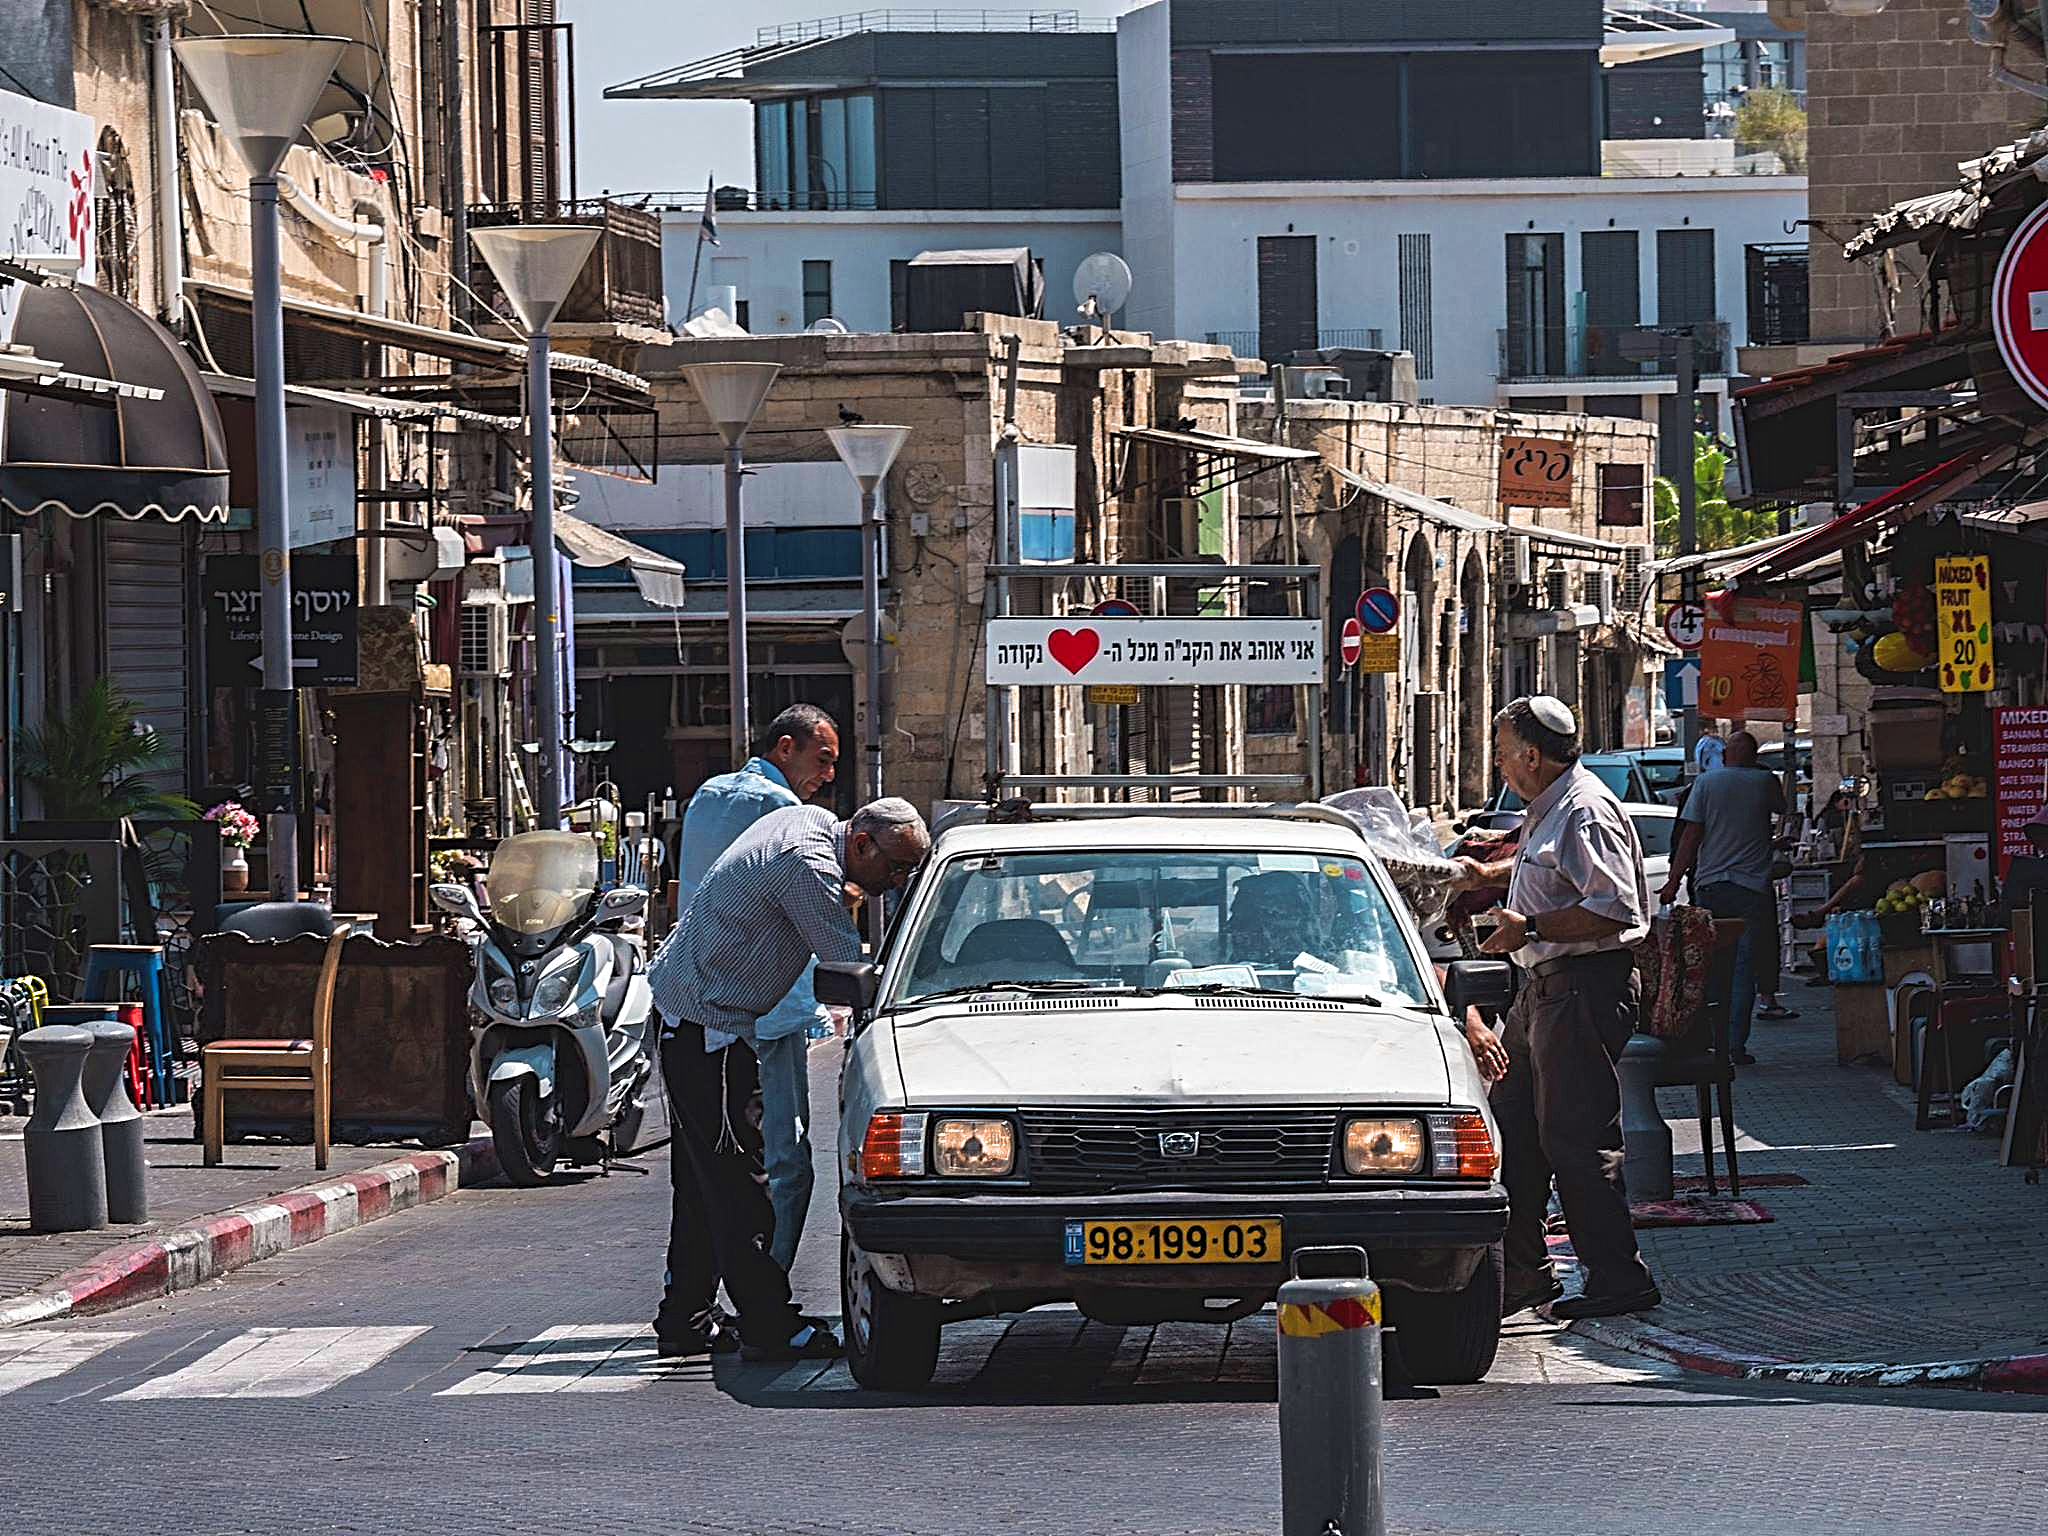  A car driver chatting with his pals in the middle of the street, Jaffa, Israel